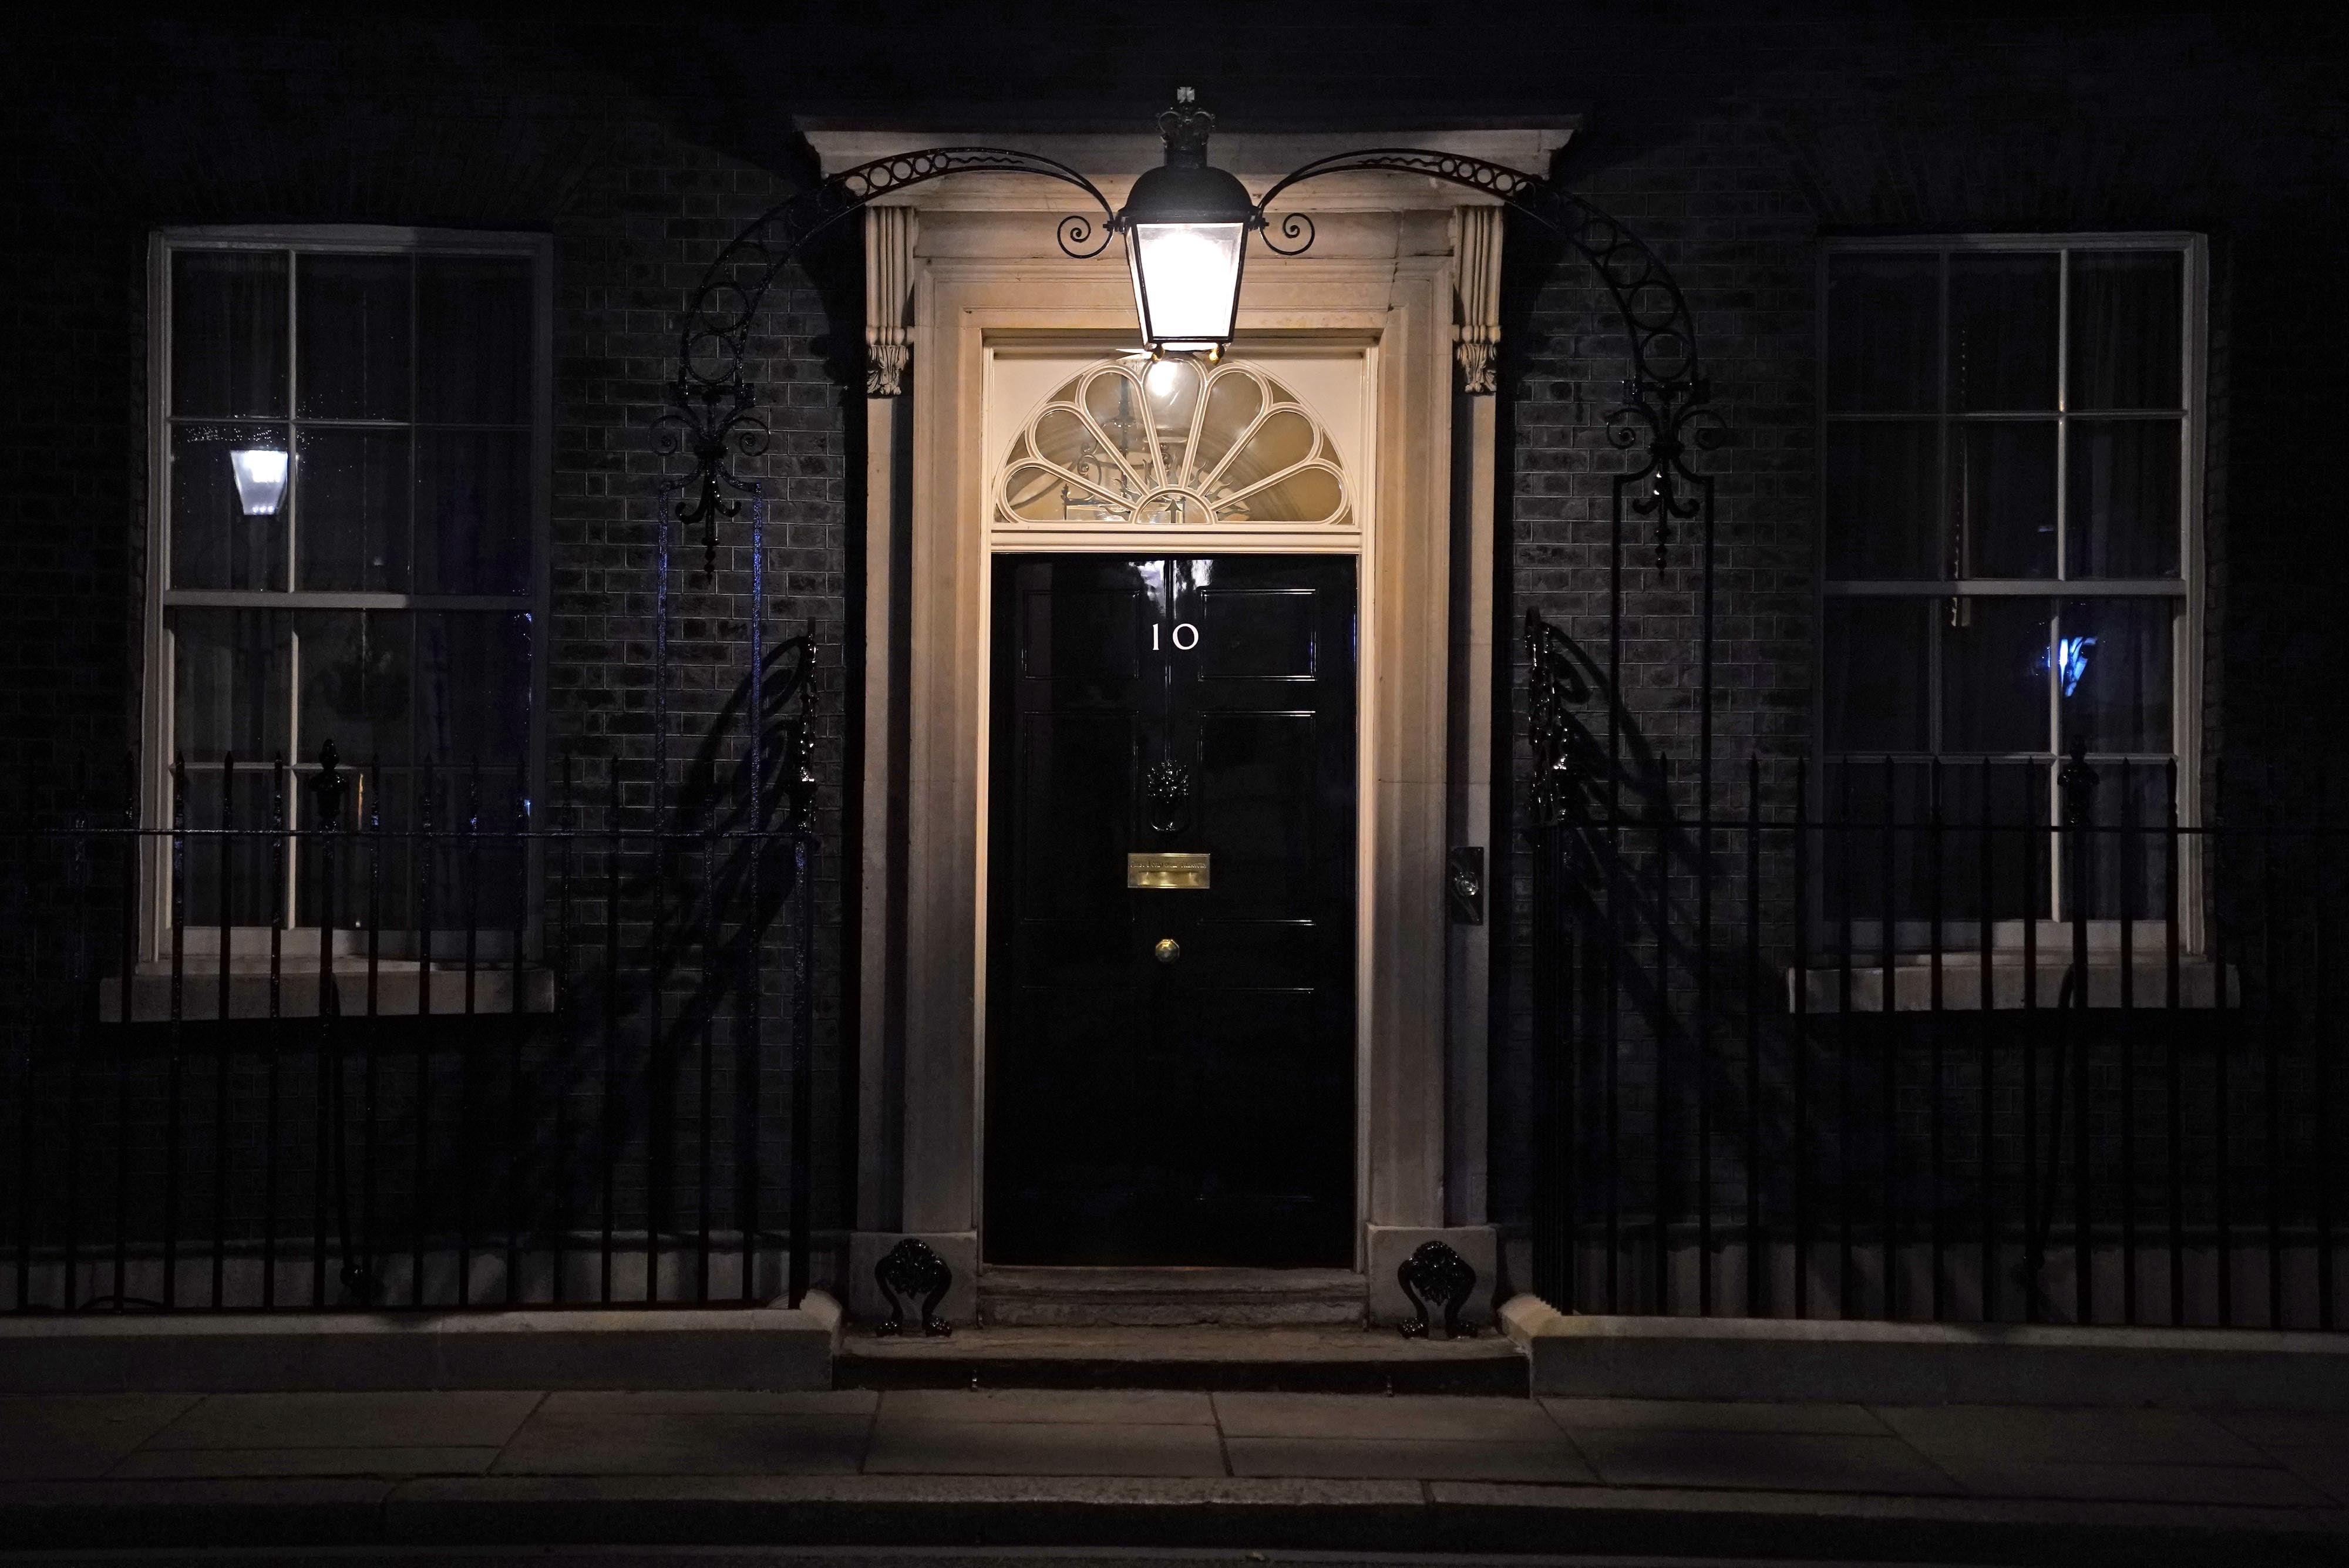 Downing Street hosted a number of events during Covid lockdown